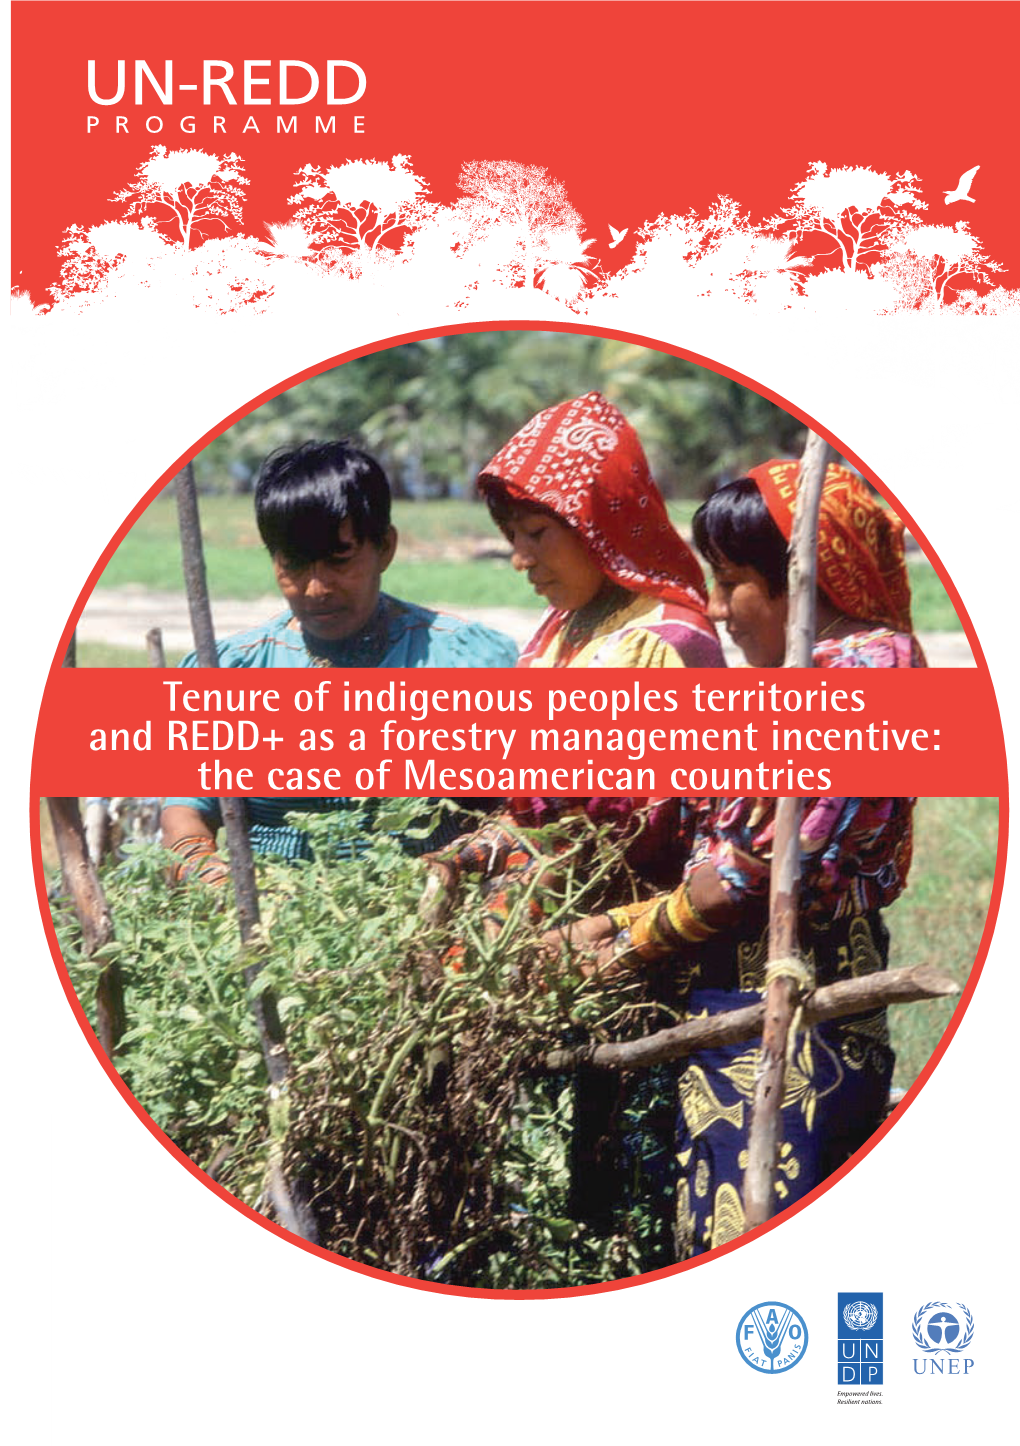 Tenure of Indigenous Peoples Territories and REDD+ As a Forestry Management Incentive: the Case of Mesoamerican Countries